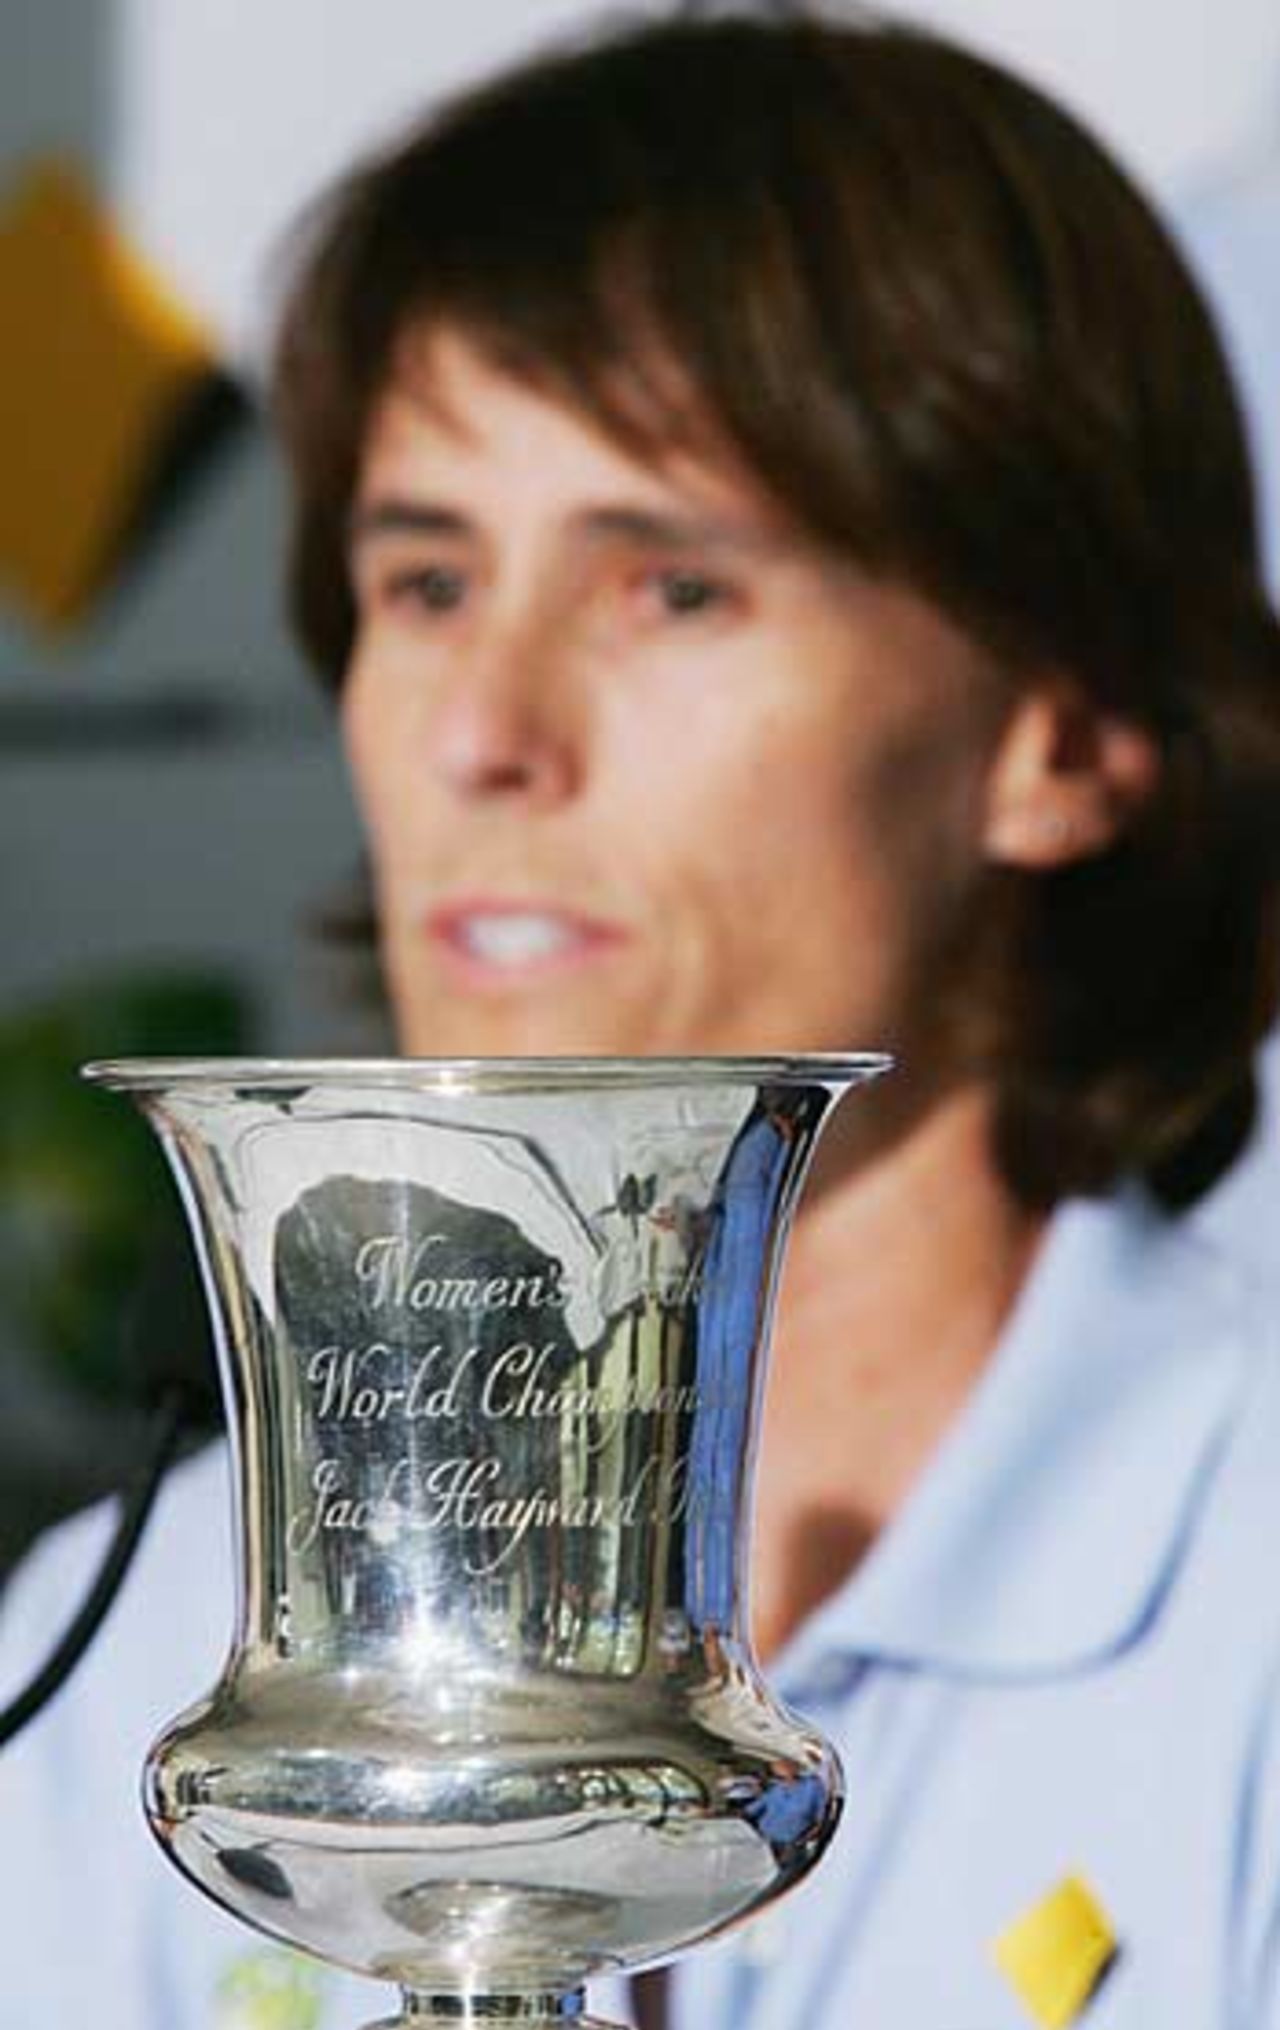 Belinda Clark with the World Cup, Perth, April 13, 2005